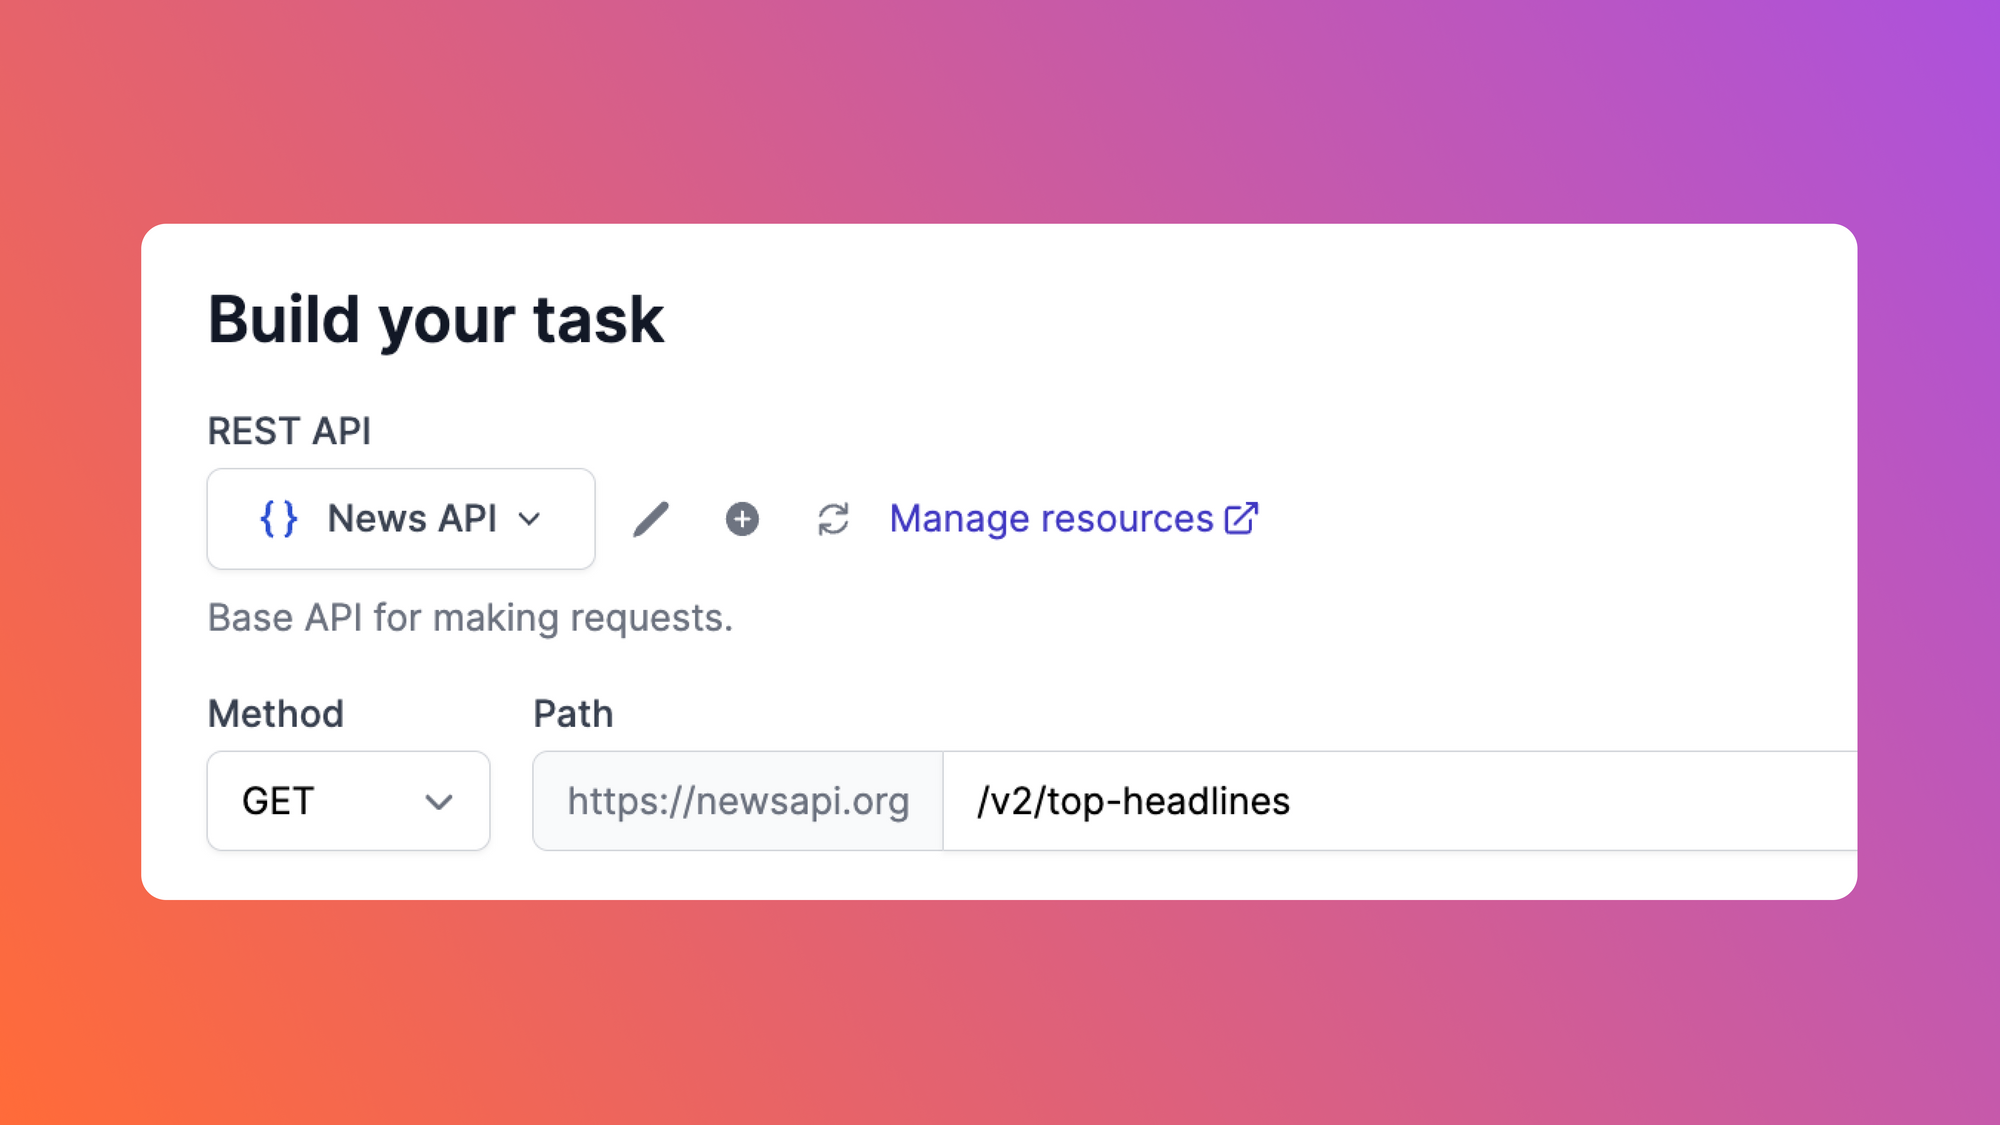 API calls: how to make and schedule API requests in three steps